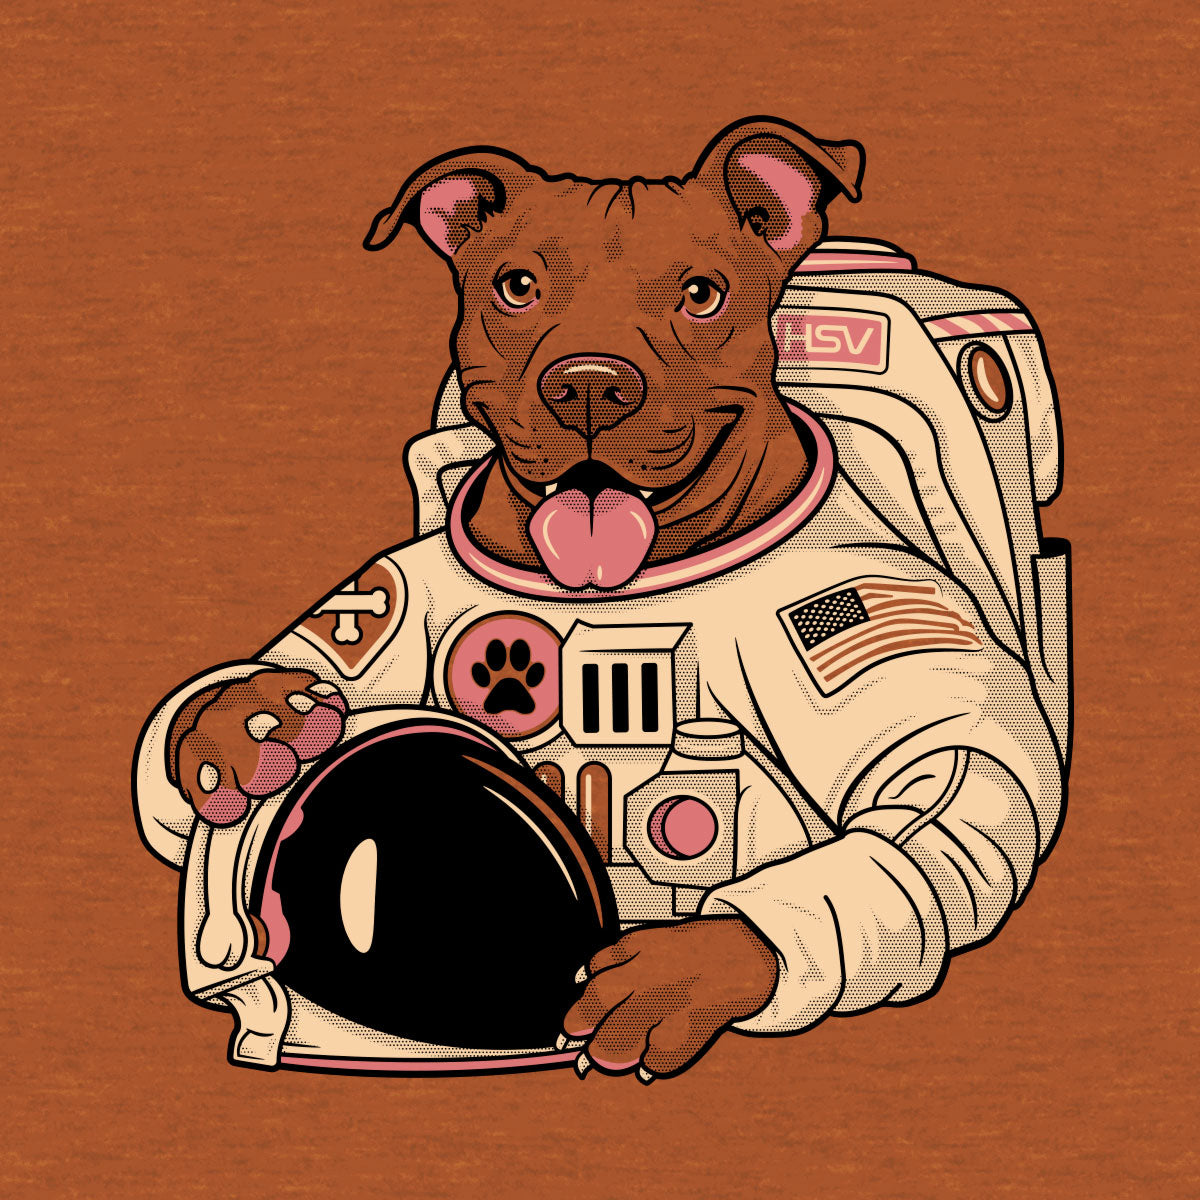 Thumbnail of pit bull mix dog dressed as astronaut design on warm heather brown 